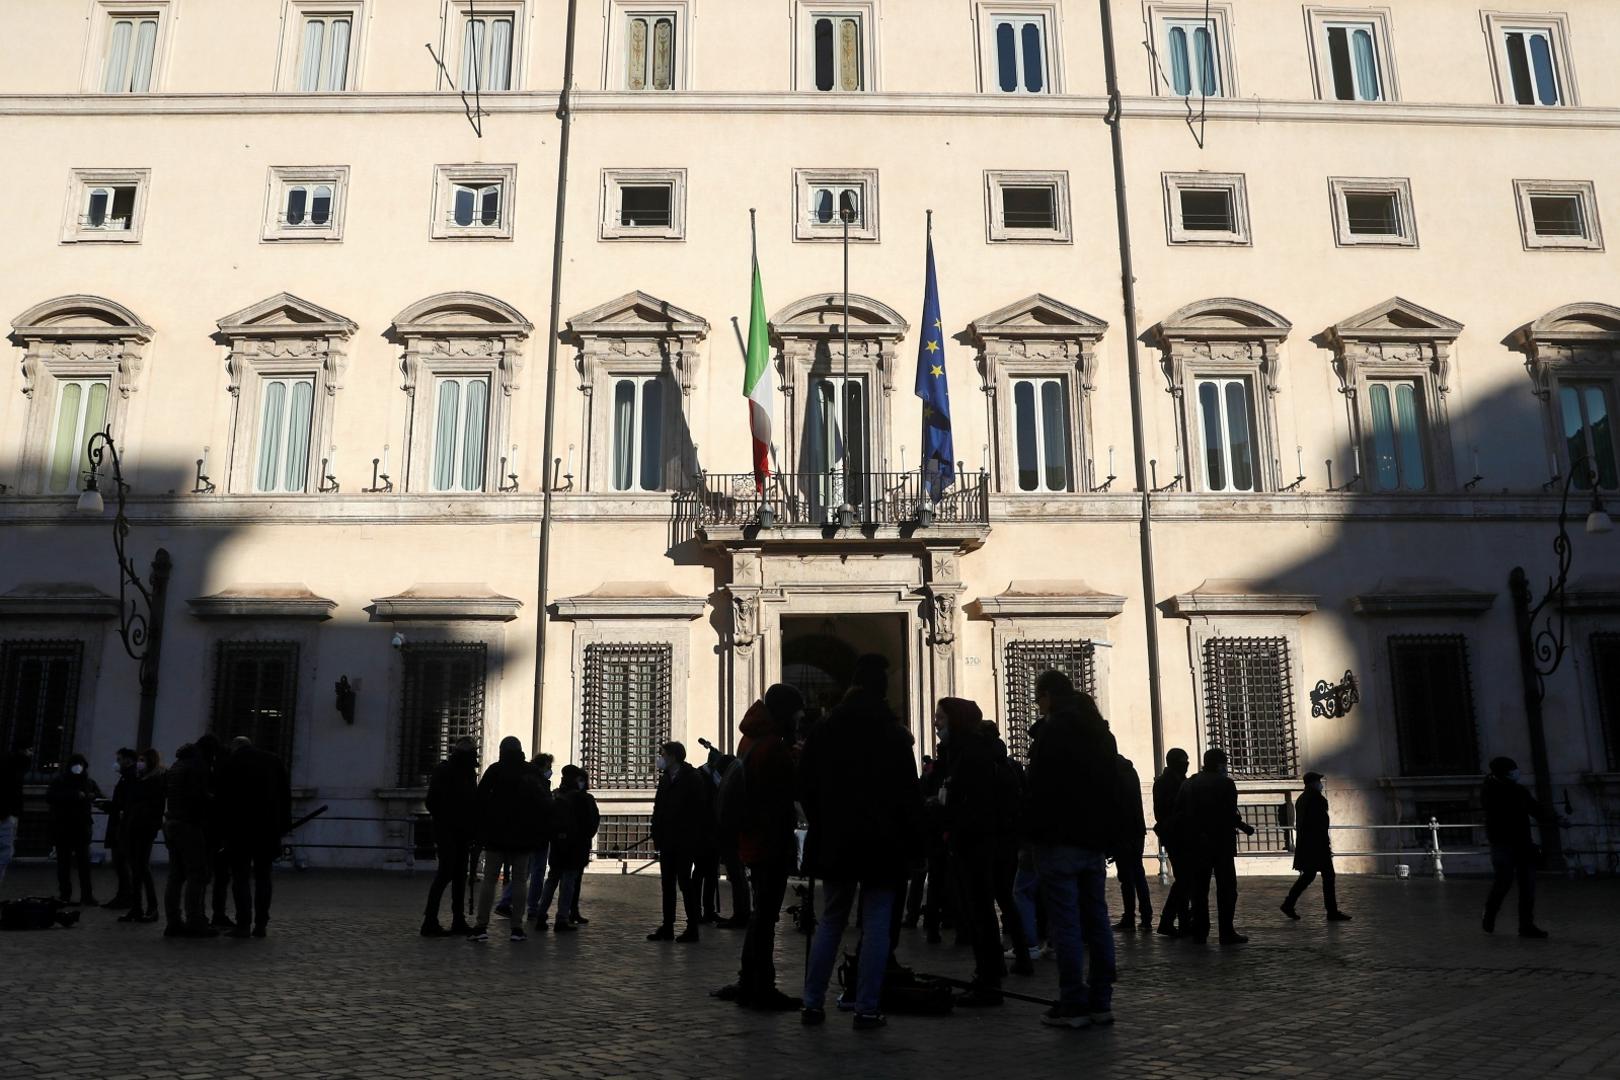 Italian PM Conte set to resign Members of the media are seen outside the Italian Prime Minister's office, Chigi Palace, as PM Giuseppe Conte looks set to hand in his resignation, in Rome, Italy, January 26, 2021. REUTERS/Yara Nardi YARA NARDI